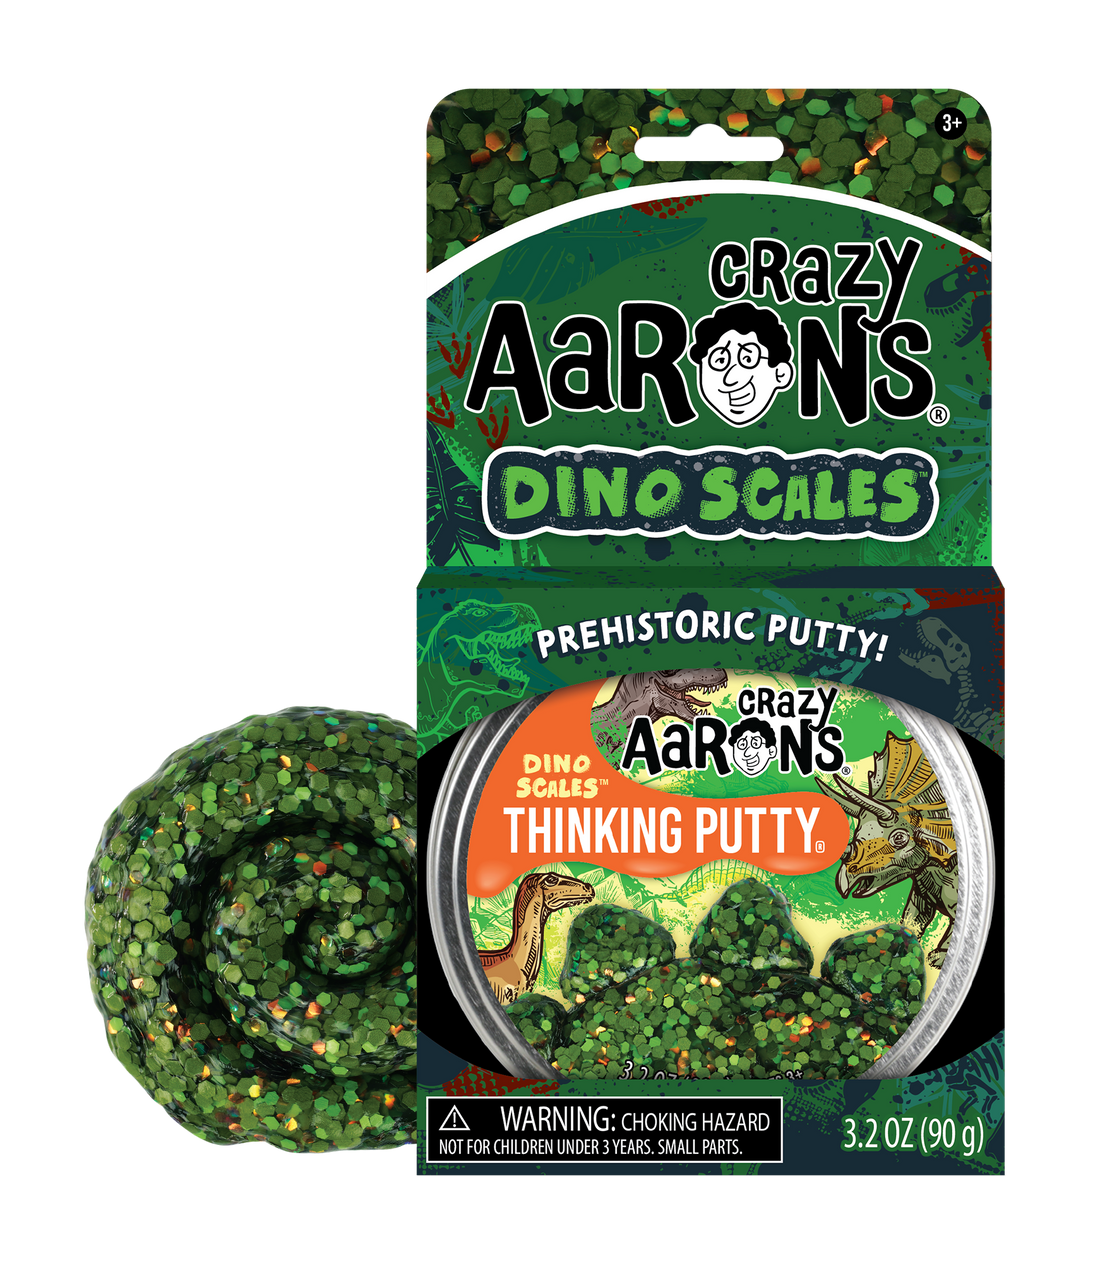 Did you know that a dinosaur's scaly skin was actually very soft and pliable? Just like Thinking Putty®! Live the lost world adventure and stretch out Dino Scales to see green scales and pops of color move back and forth within the clear putty. Prehistoric colors changes as you play. A great gift for Dinosaur and nature lovers.